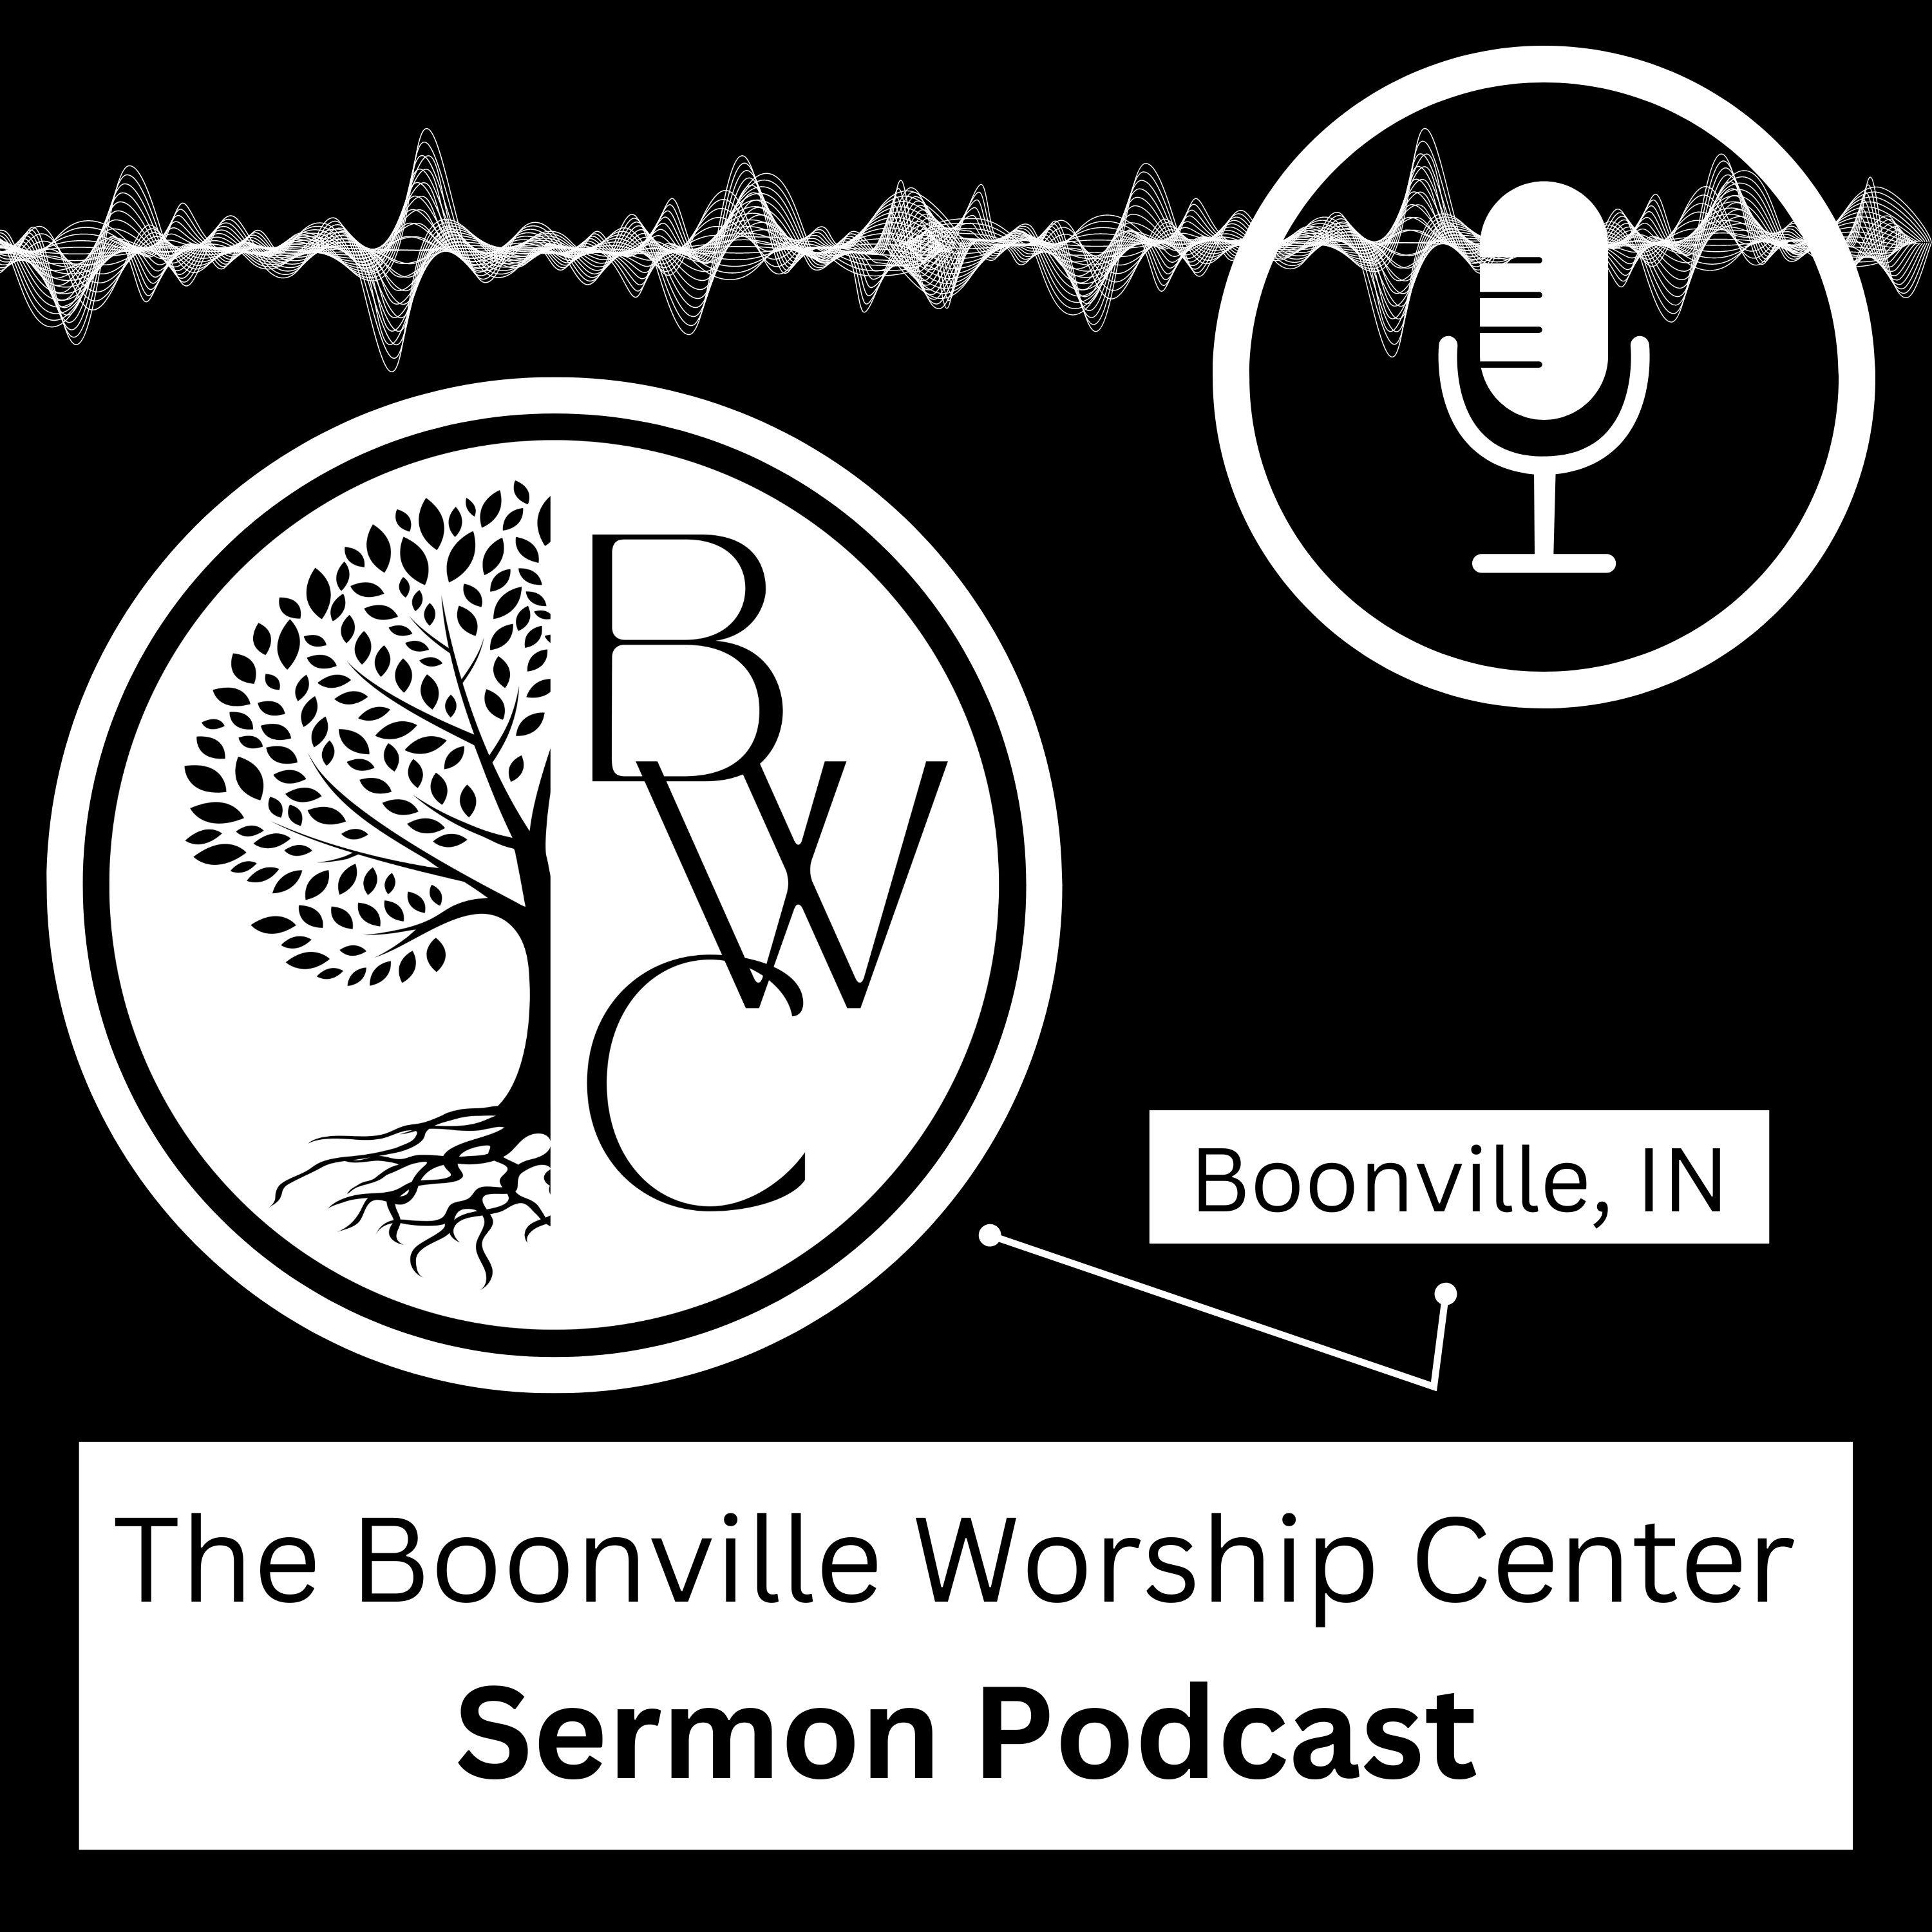 The Boonville Worship Center Sermon Podcast